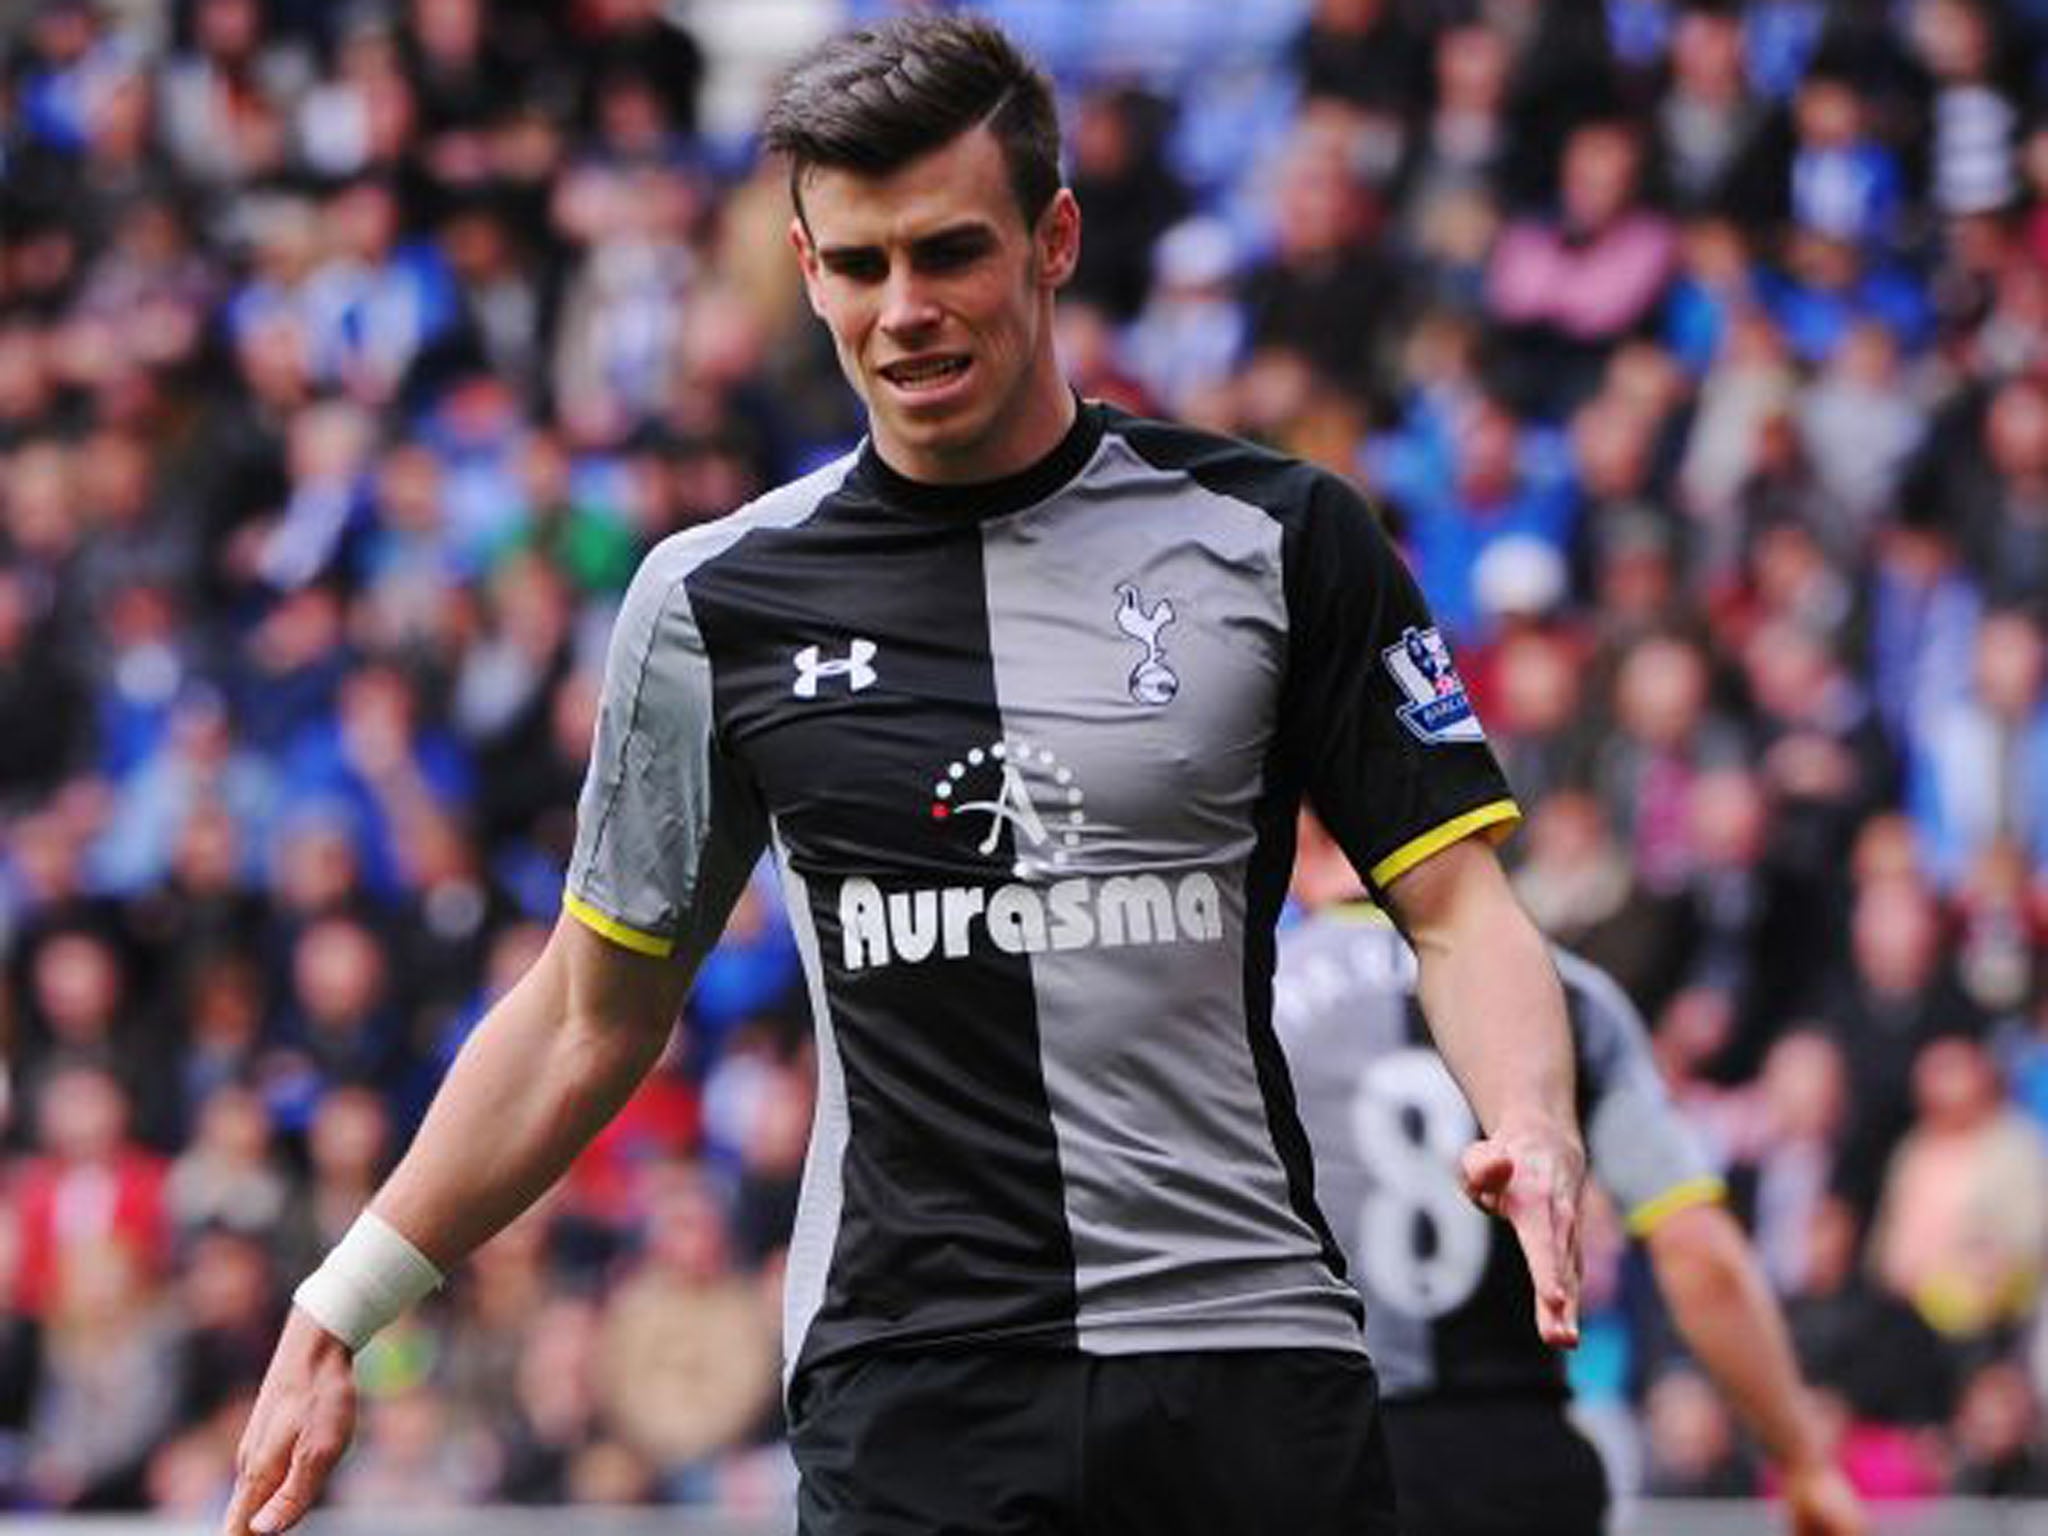 Tottenham's Gareth Bale did not have his greatest game, but was still on hand to open the scoring against Wigan after charging down a goalkeeper clearance (Getty Images)